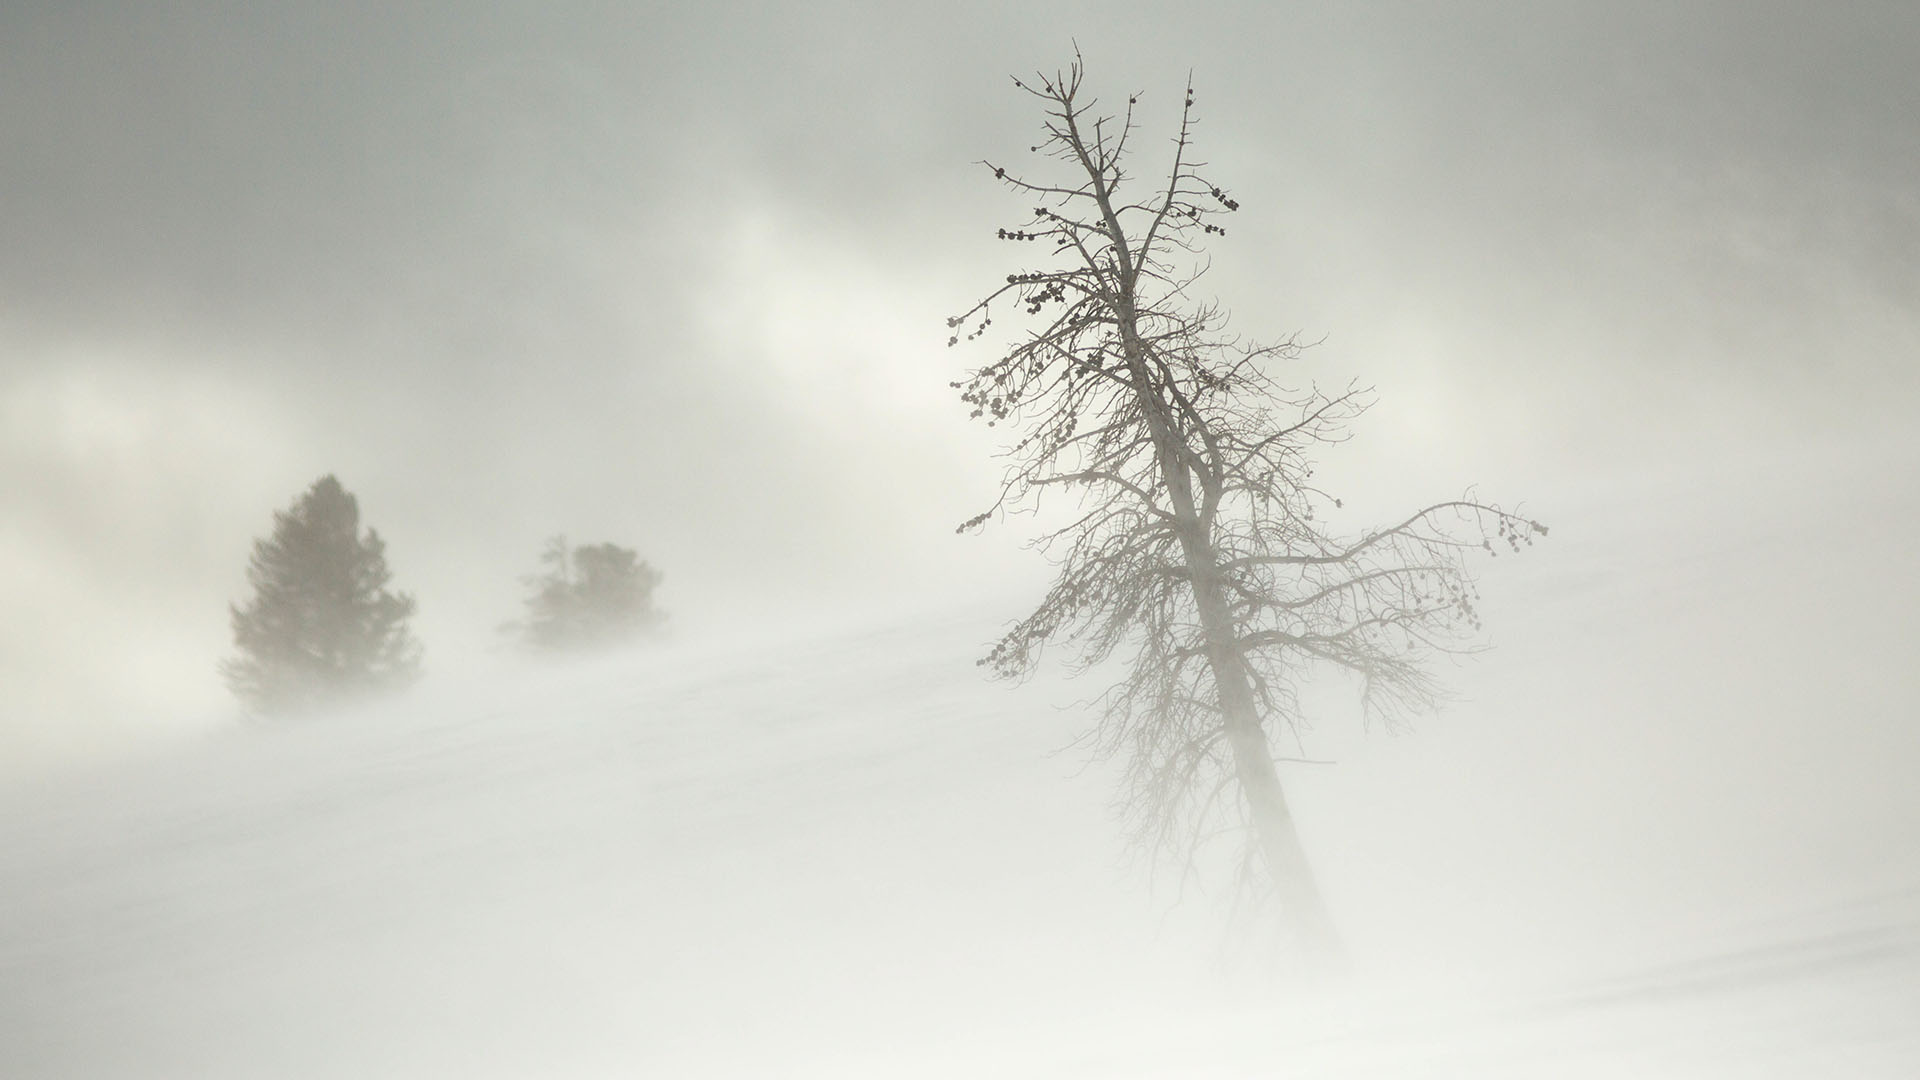 Blizzard conditions in the Yellowstone interior. This is from WILD YELLOWSTONE. [Photo of the day - December 2022]